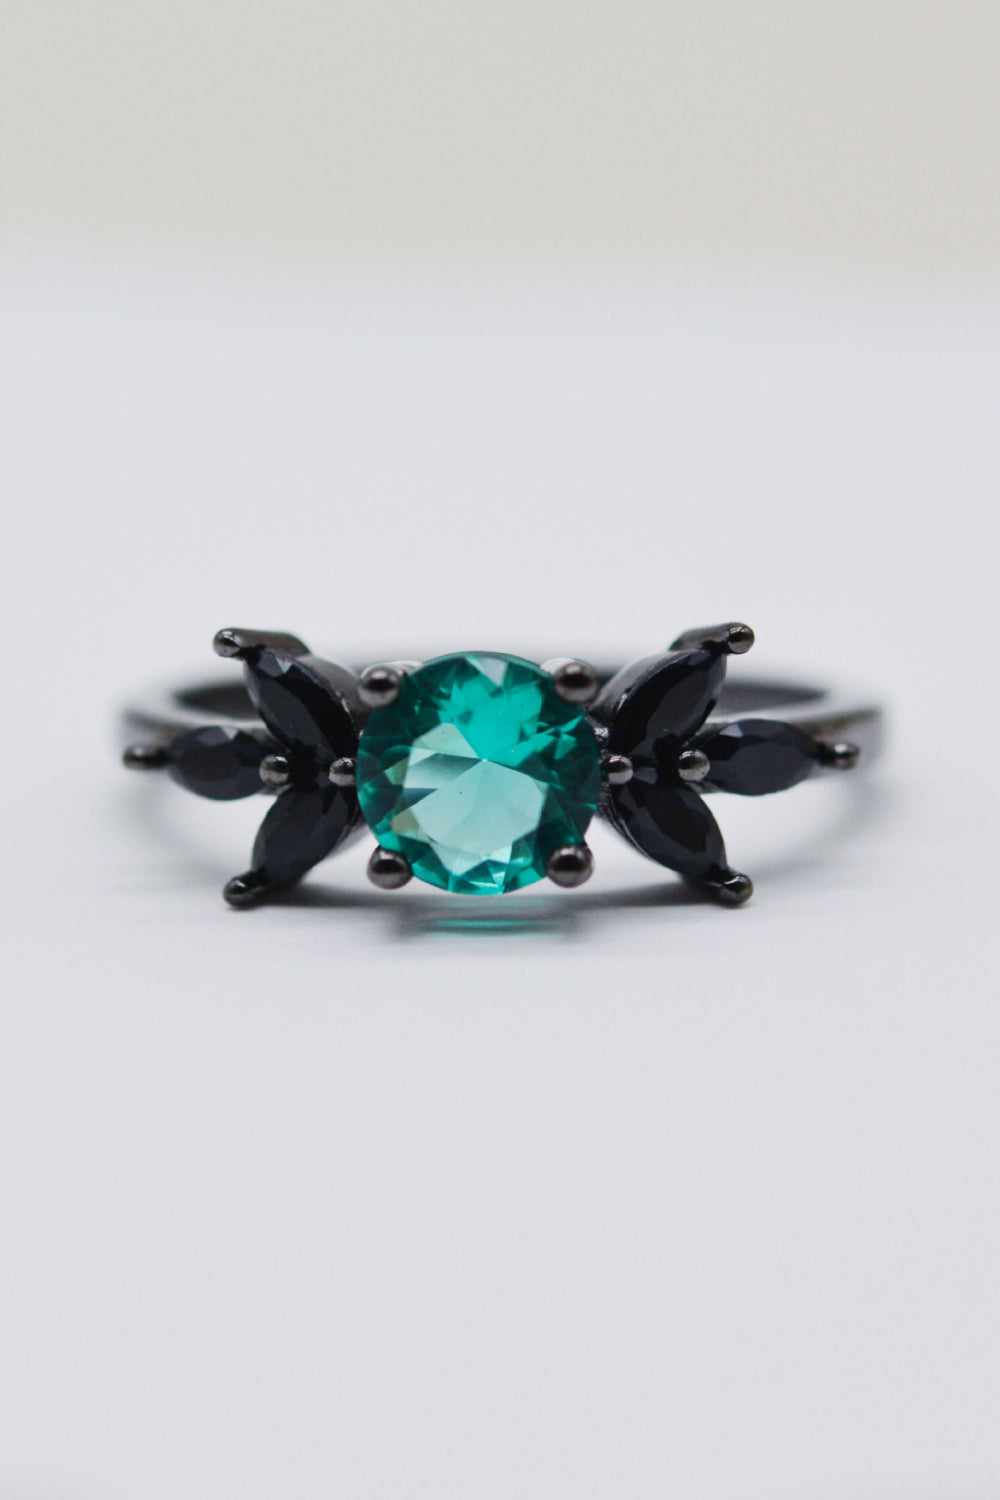 Paraiba Tourmaline and Zircon Leaf Ring - ring at TFC&H Co.